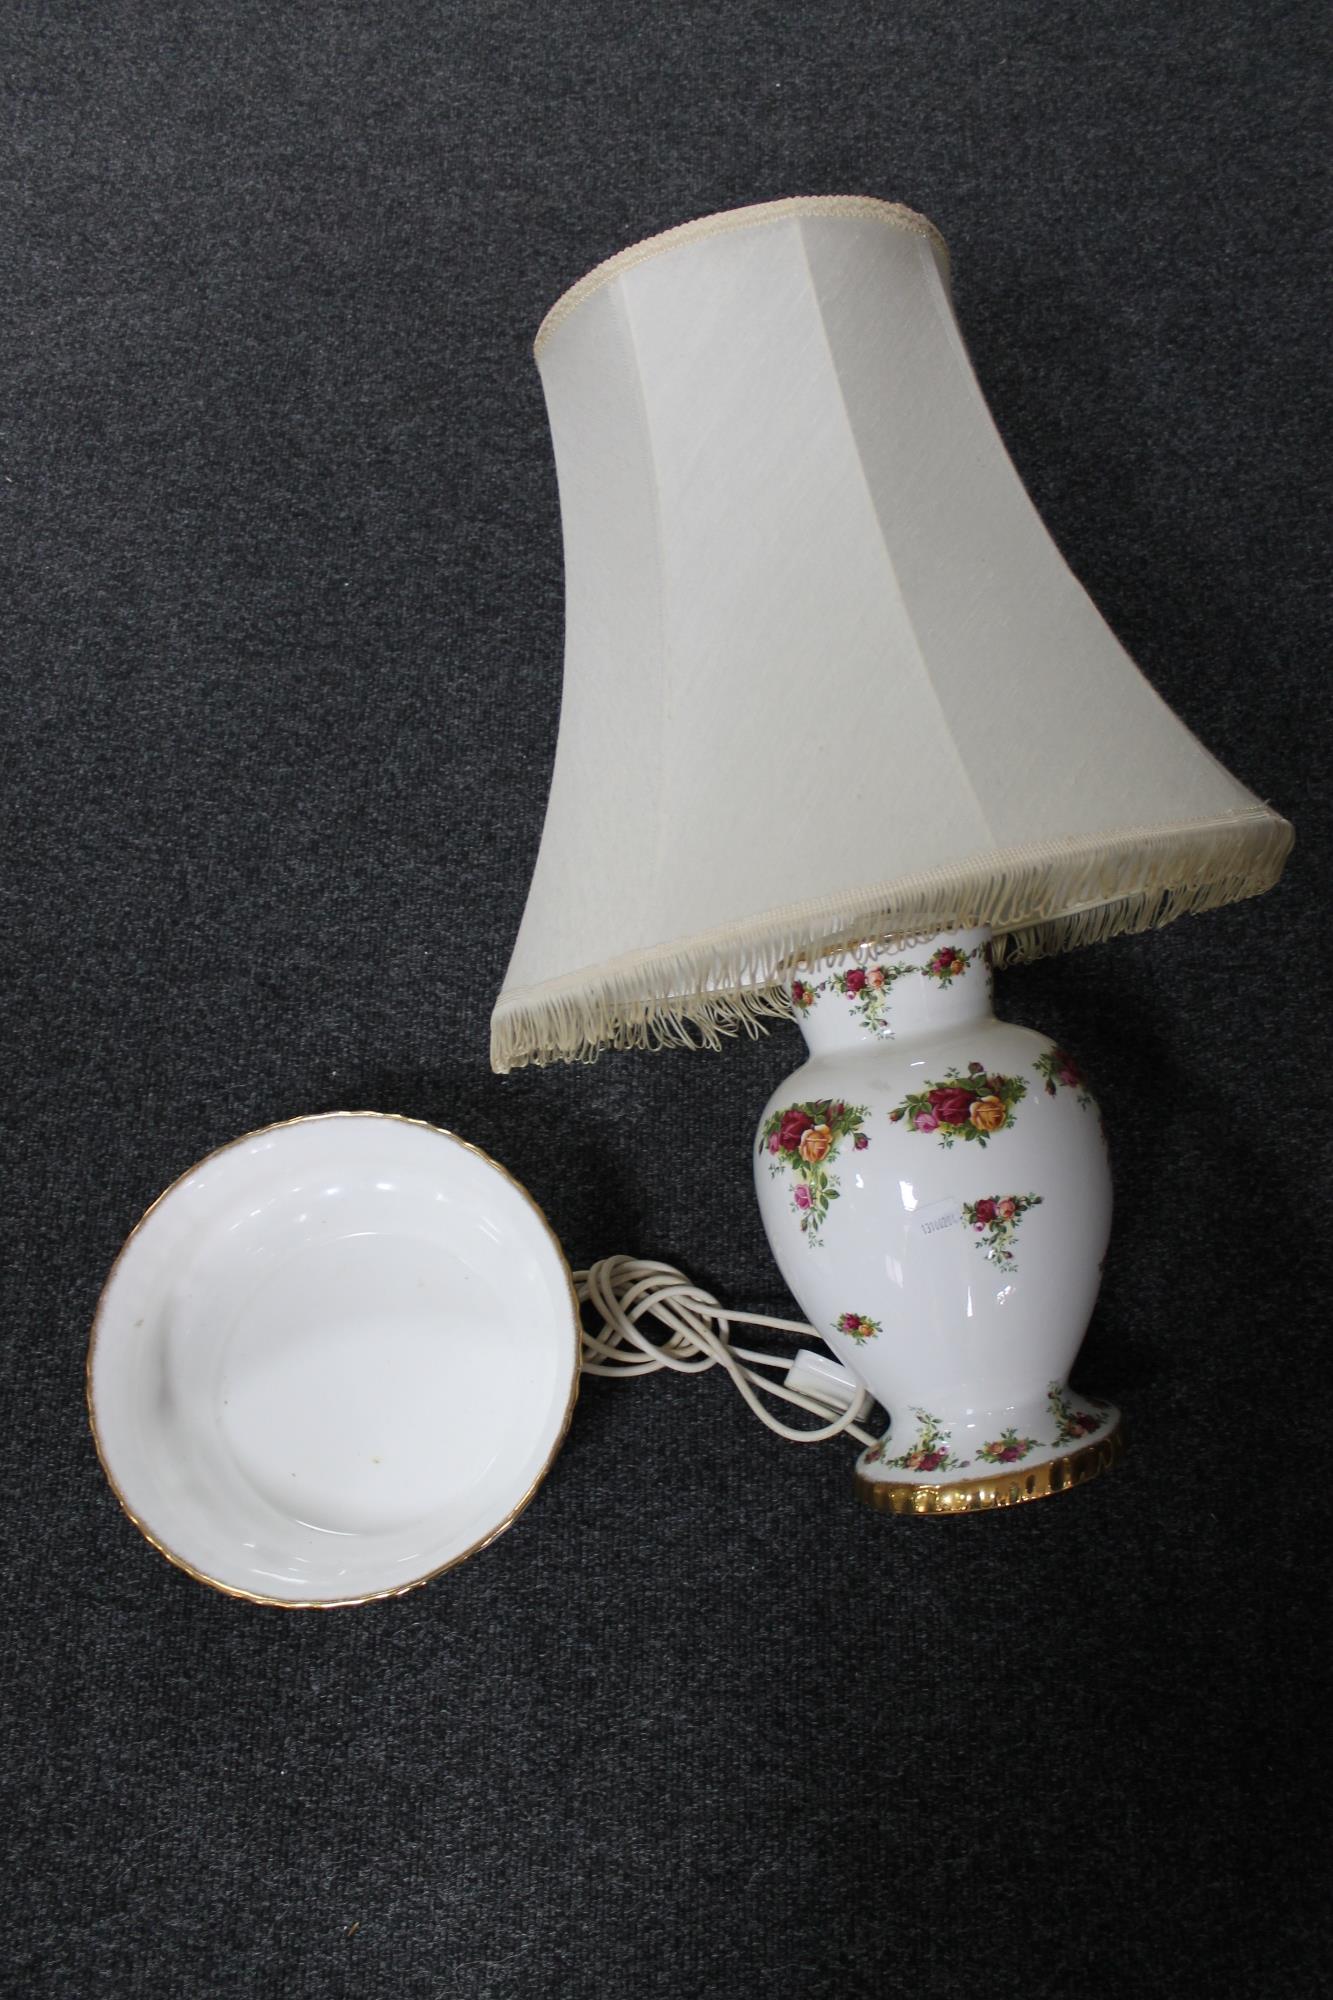 A Royal Albert Old Country Roses table lamp and bowl